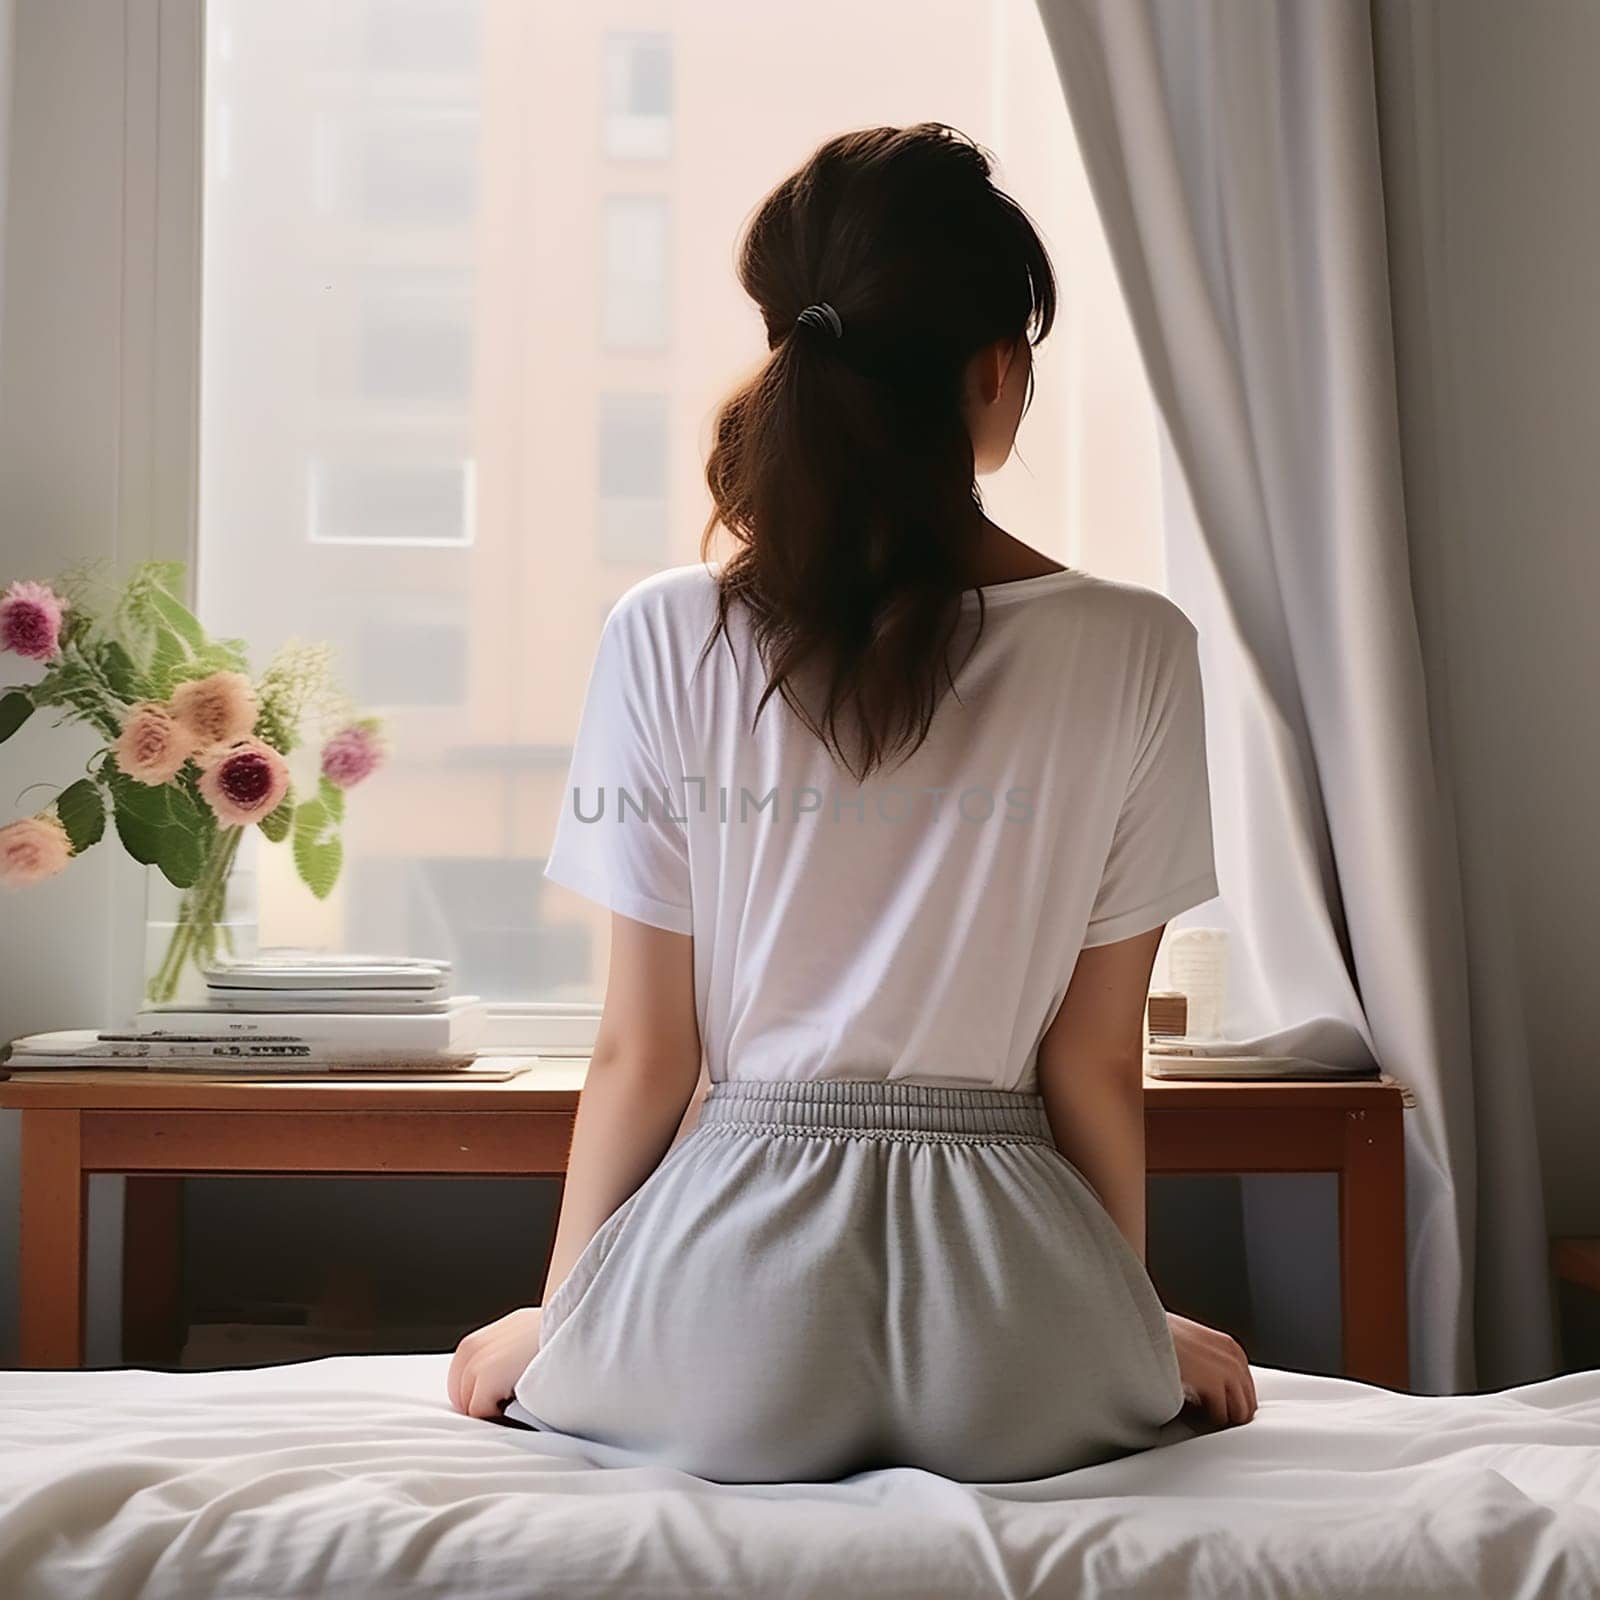 Solitude in Comfort: Woman's Back View on Bed